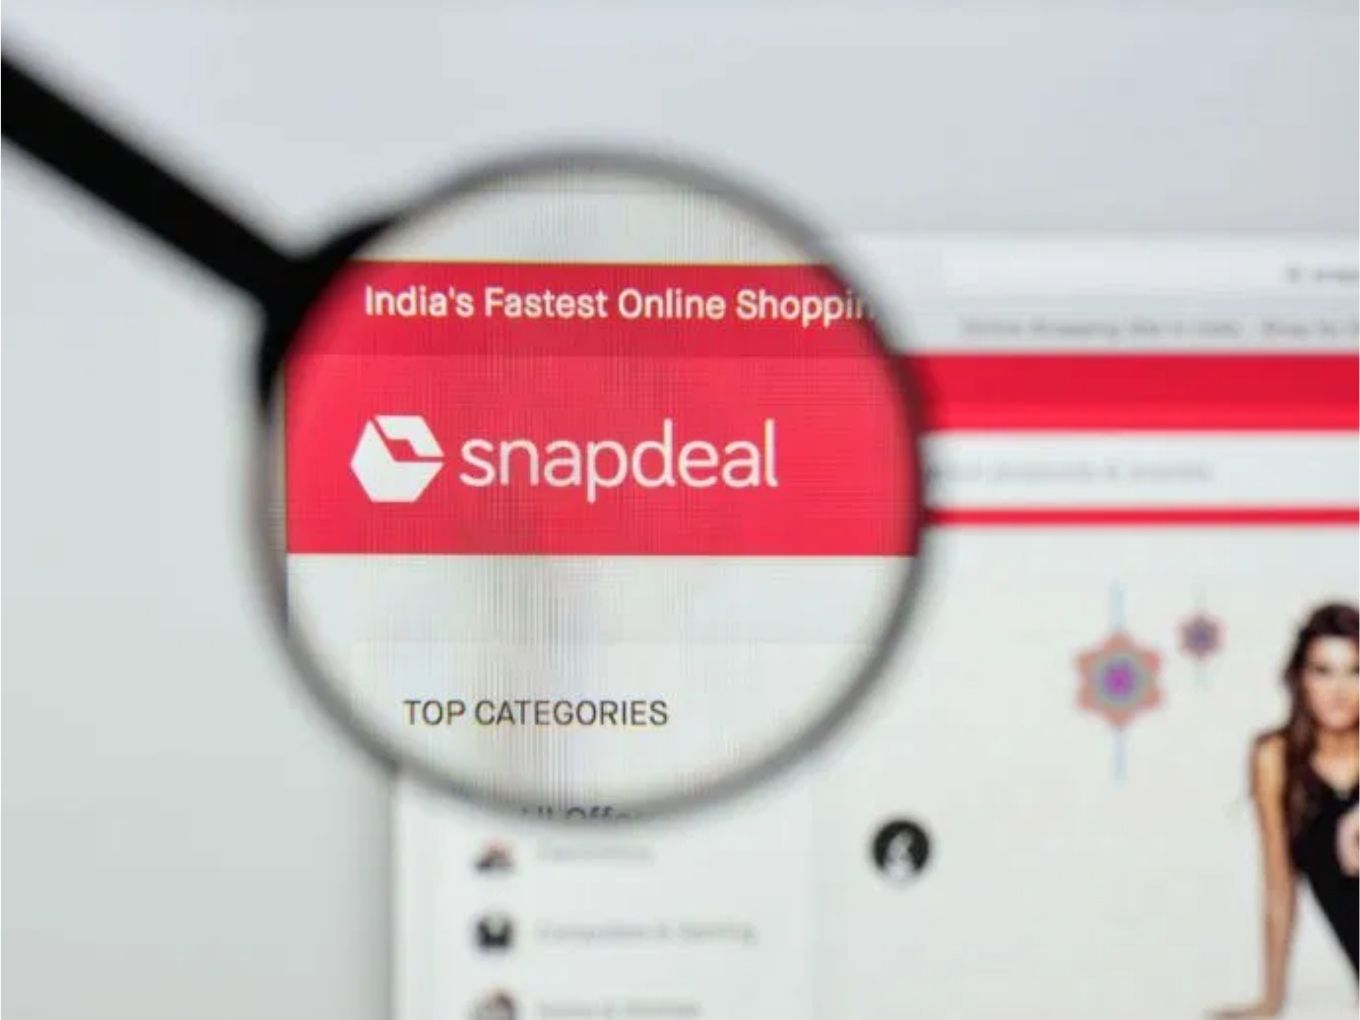 Snapdeal Dragged To Court Again For Selling Duplicate Products